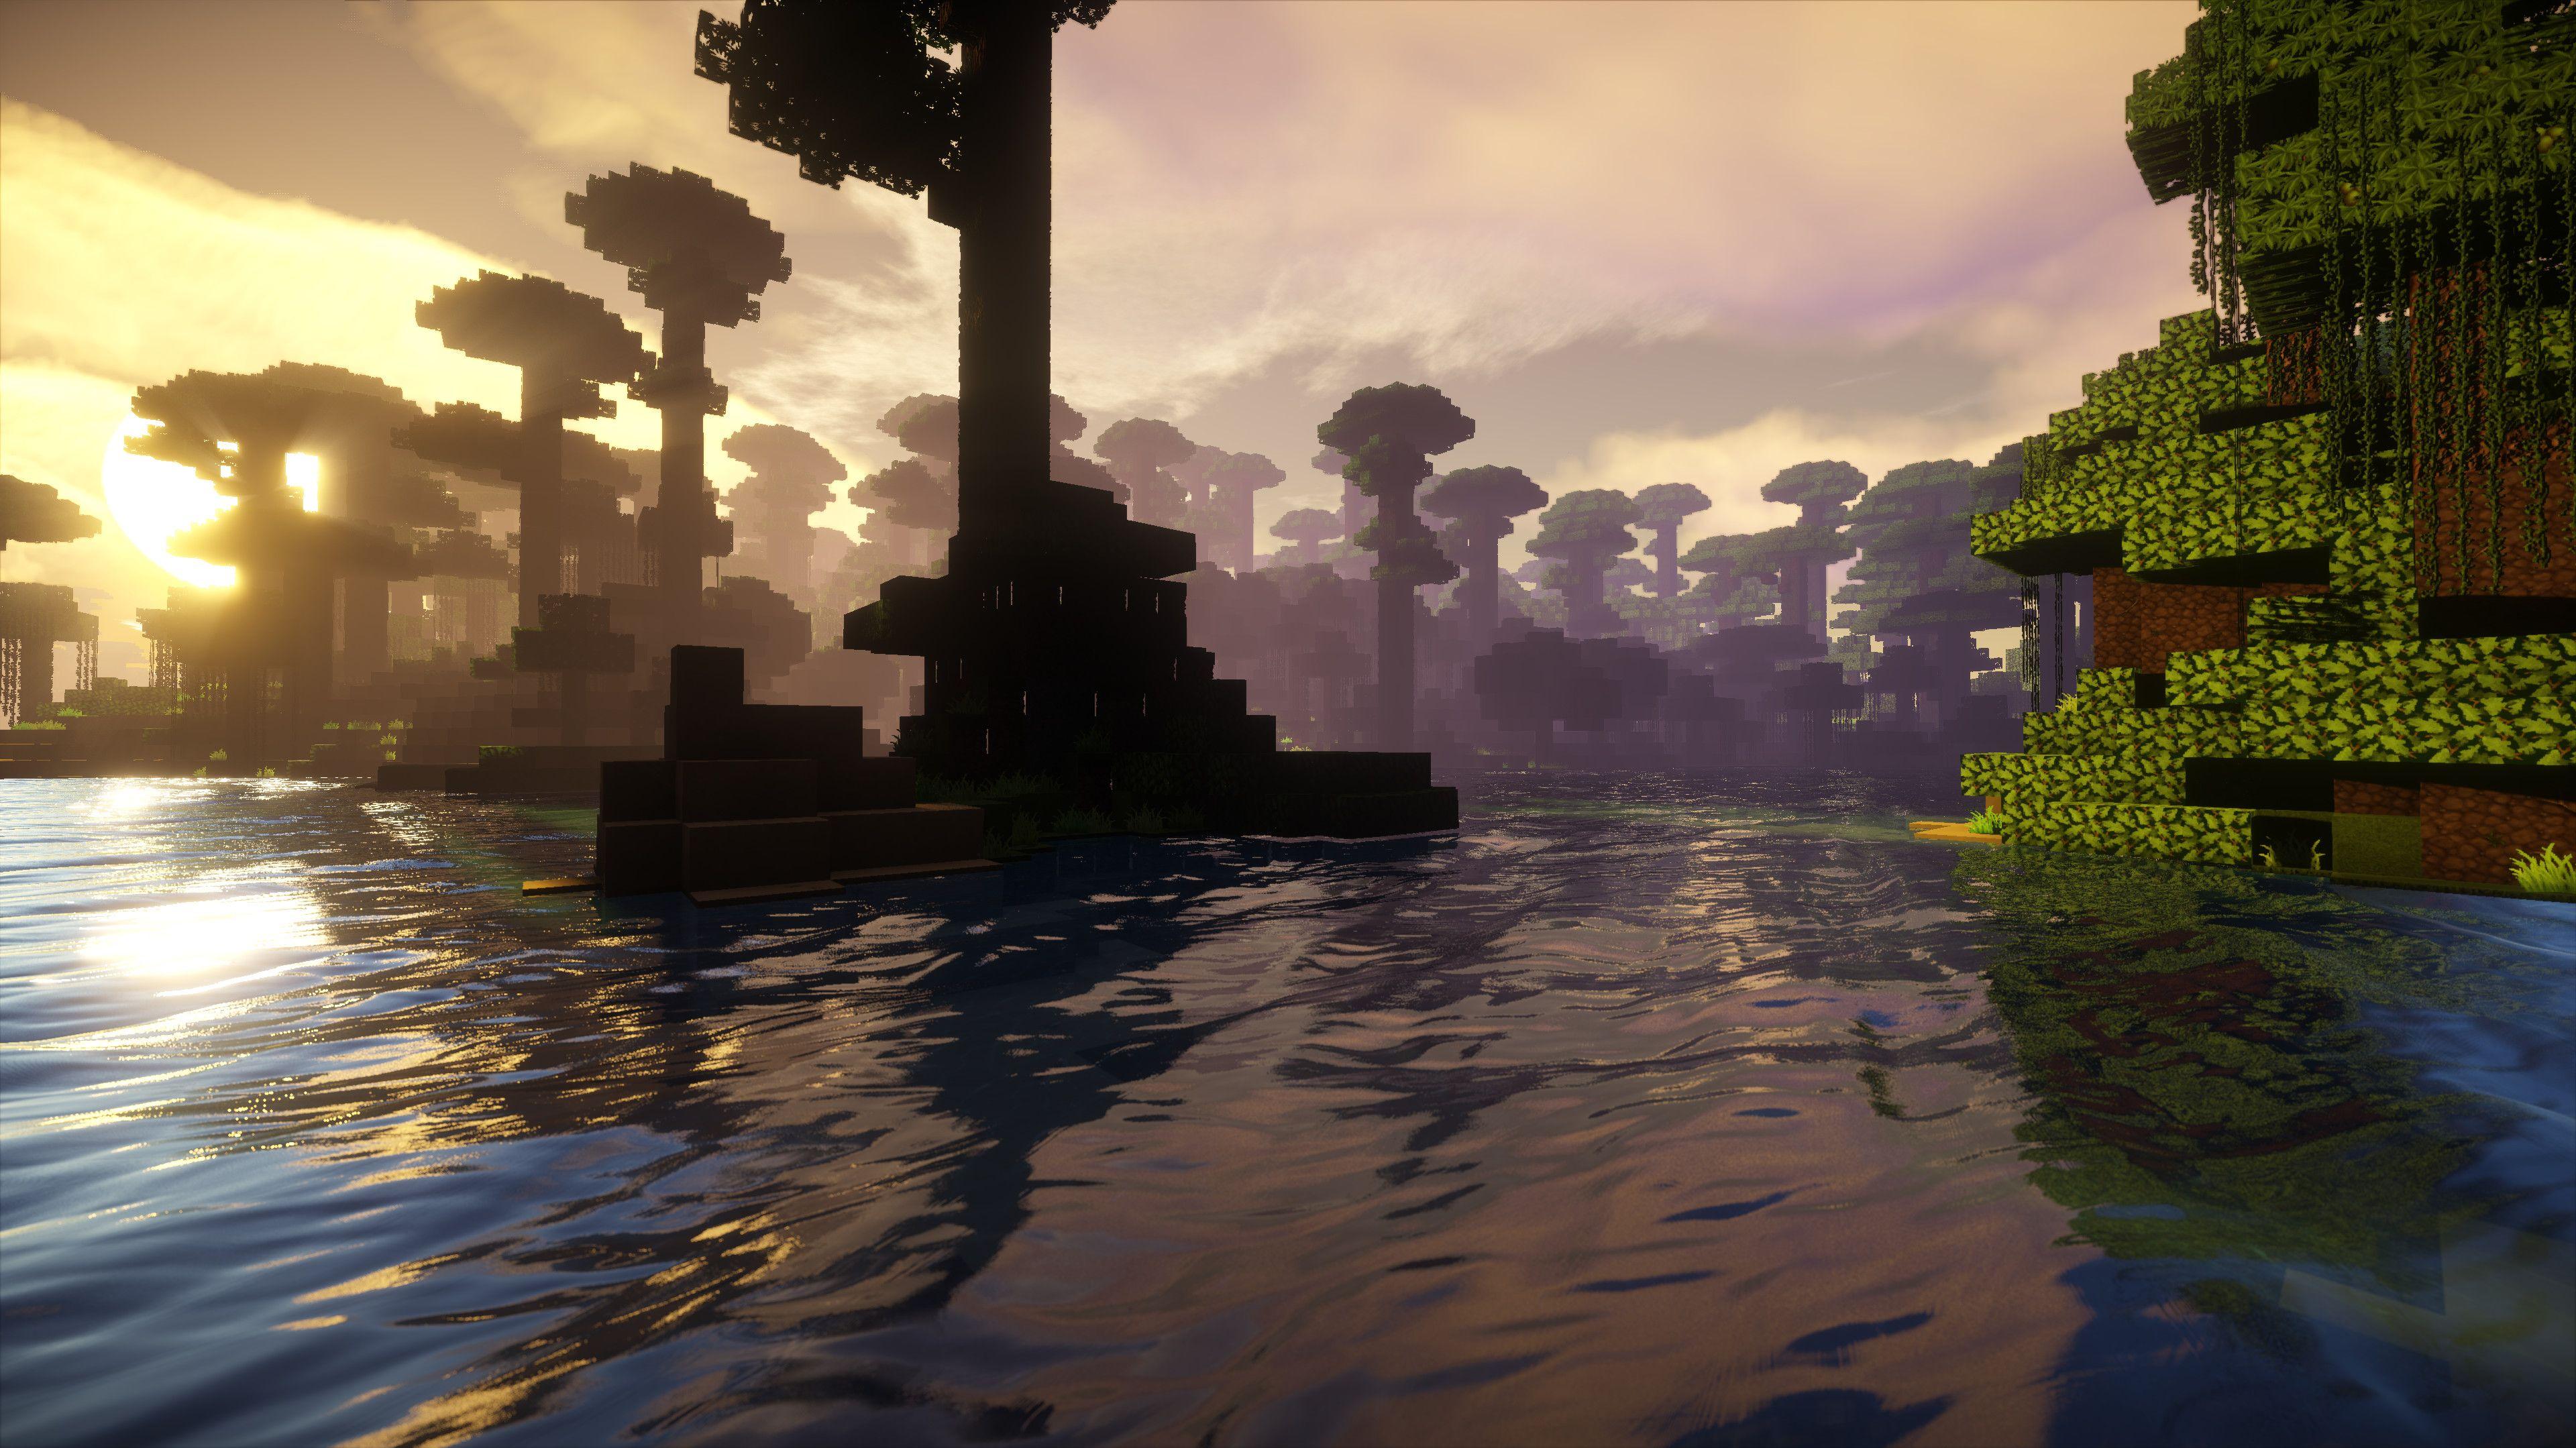 577653 3840x2130 minecraft 4k edition 4k new hd wallpaper download - Rare  Gallery HD Wallpapers